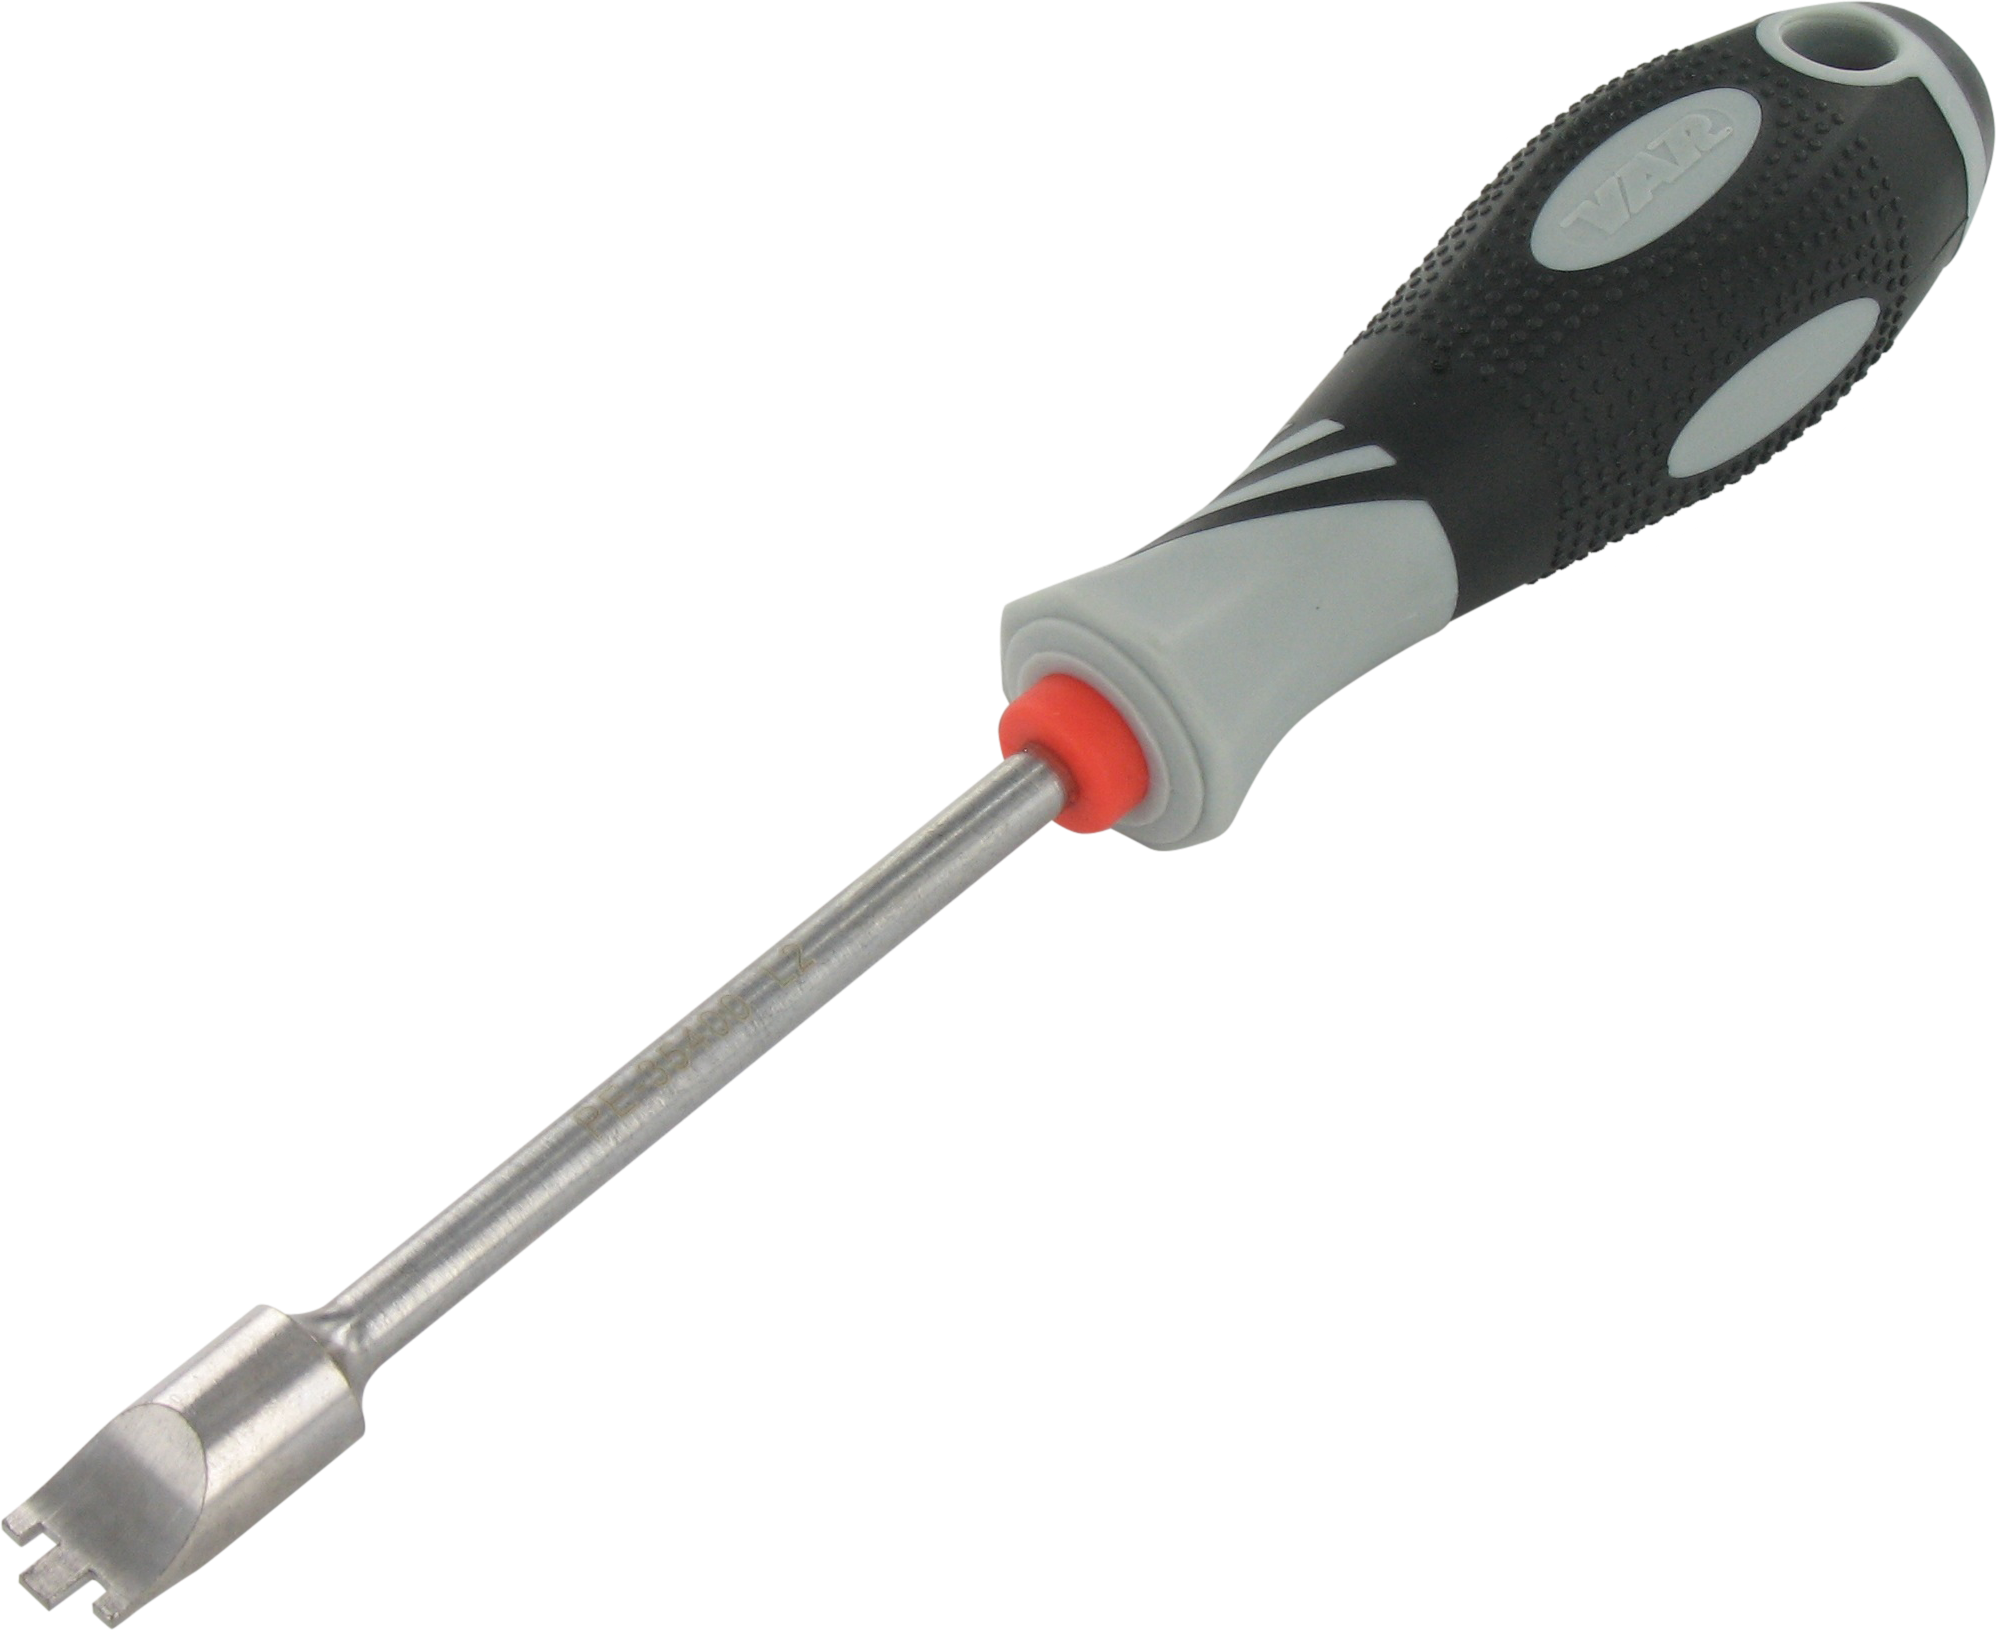 red screwdriver - /tools/hand